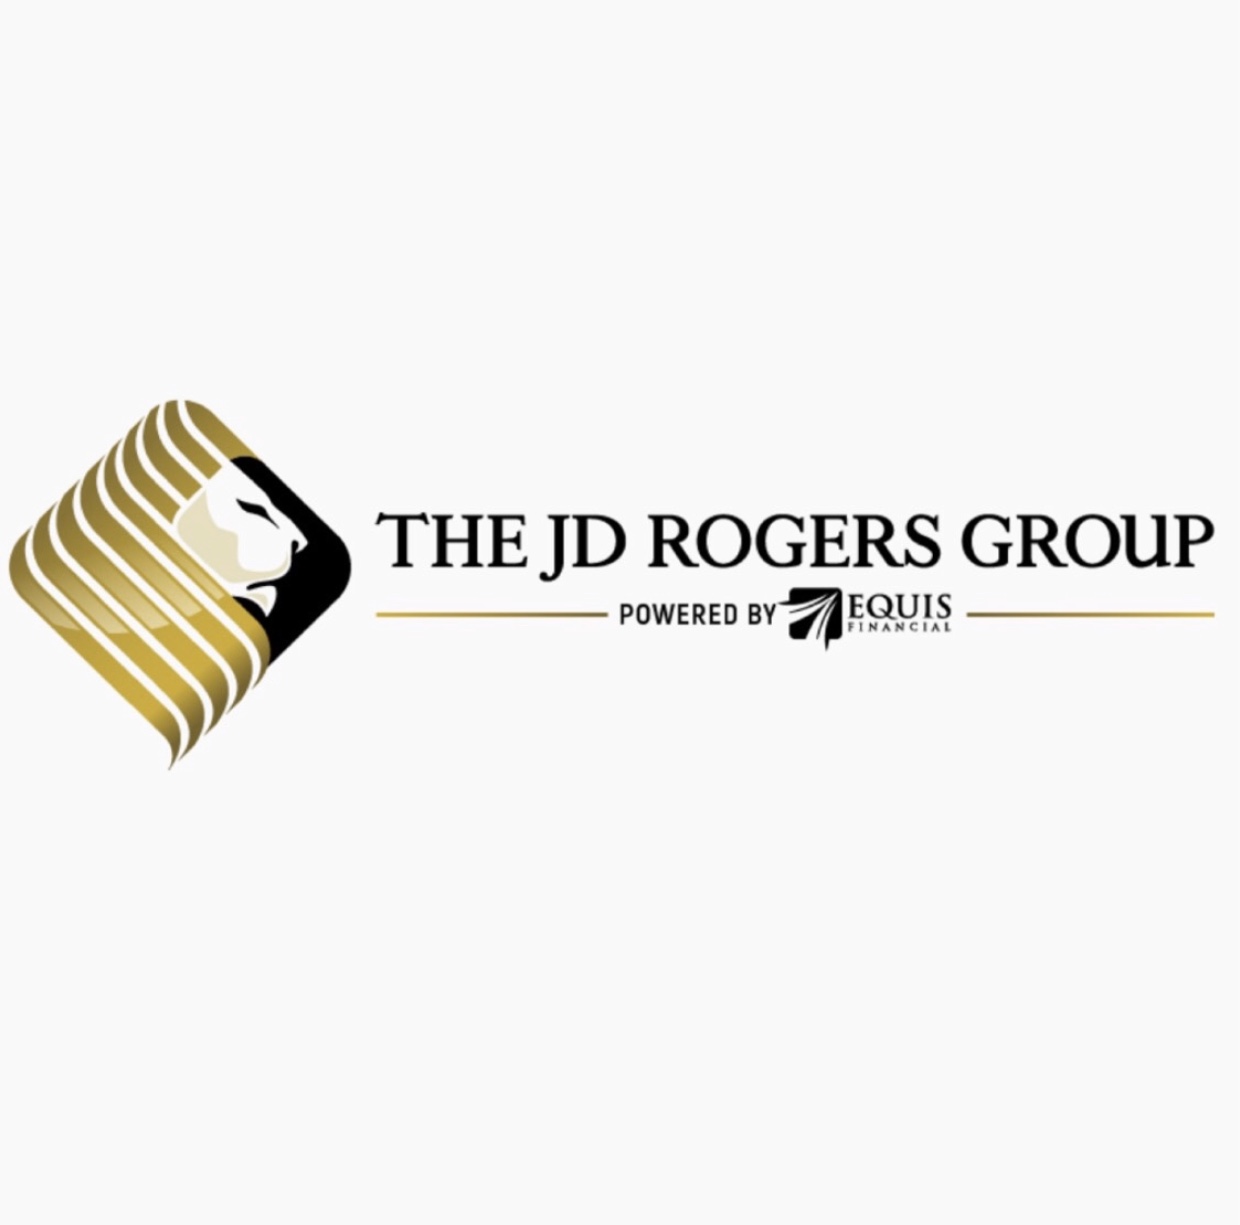 The JD Rogers Group logo